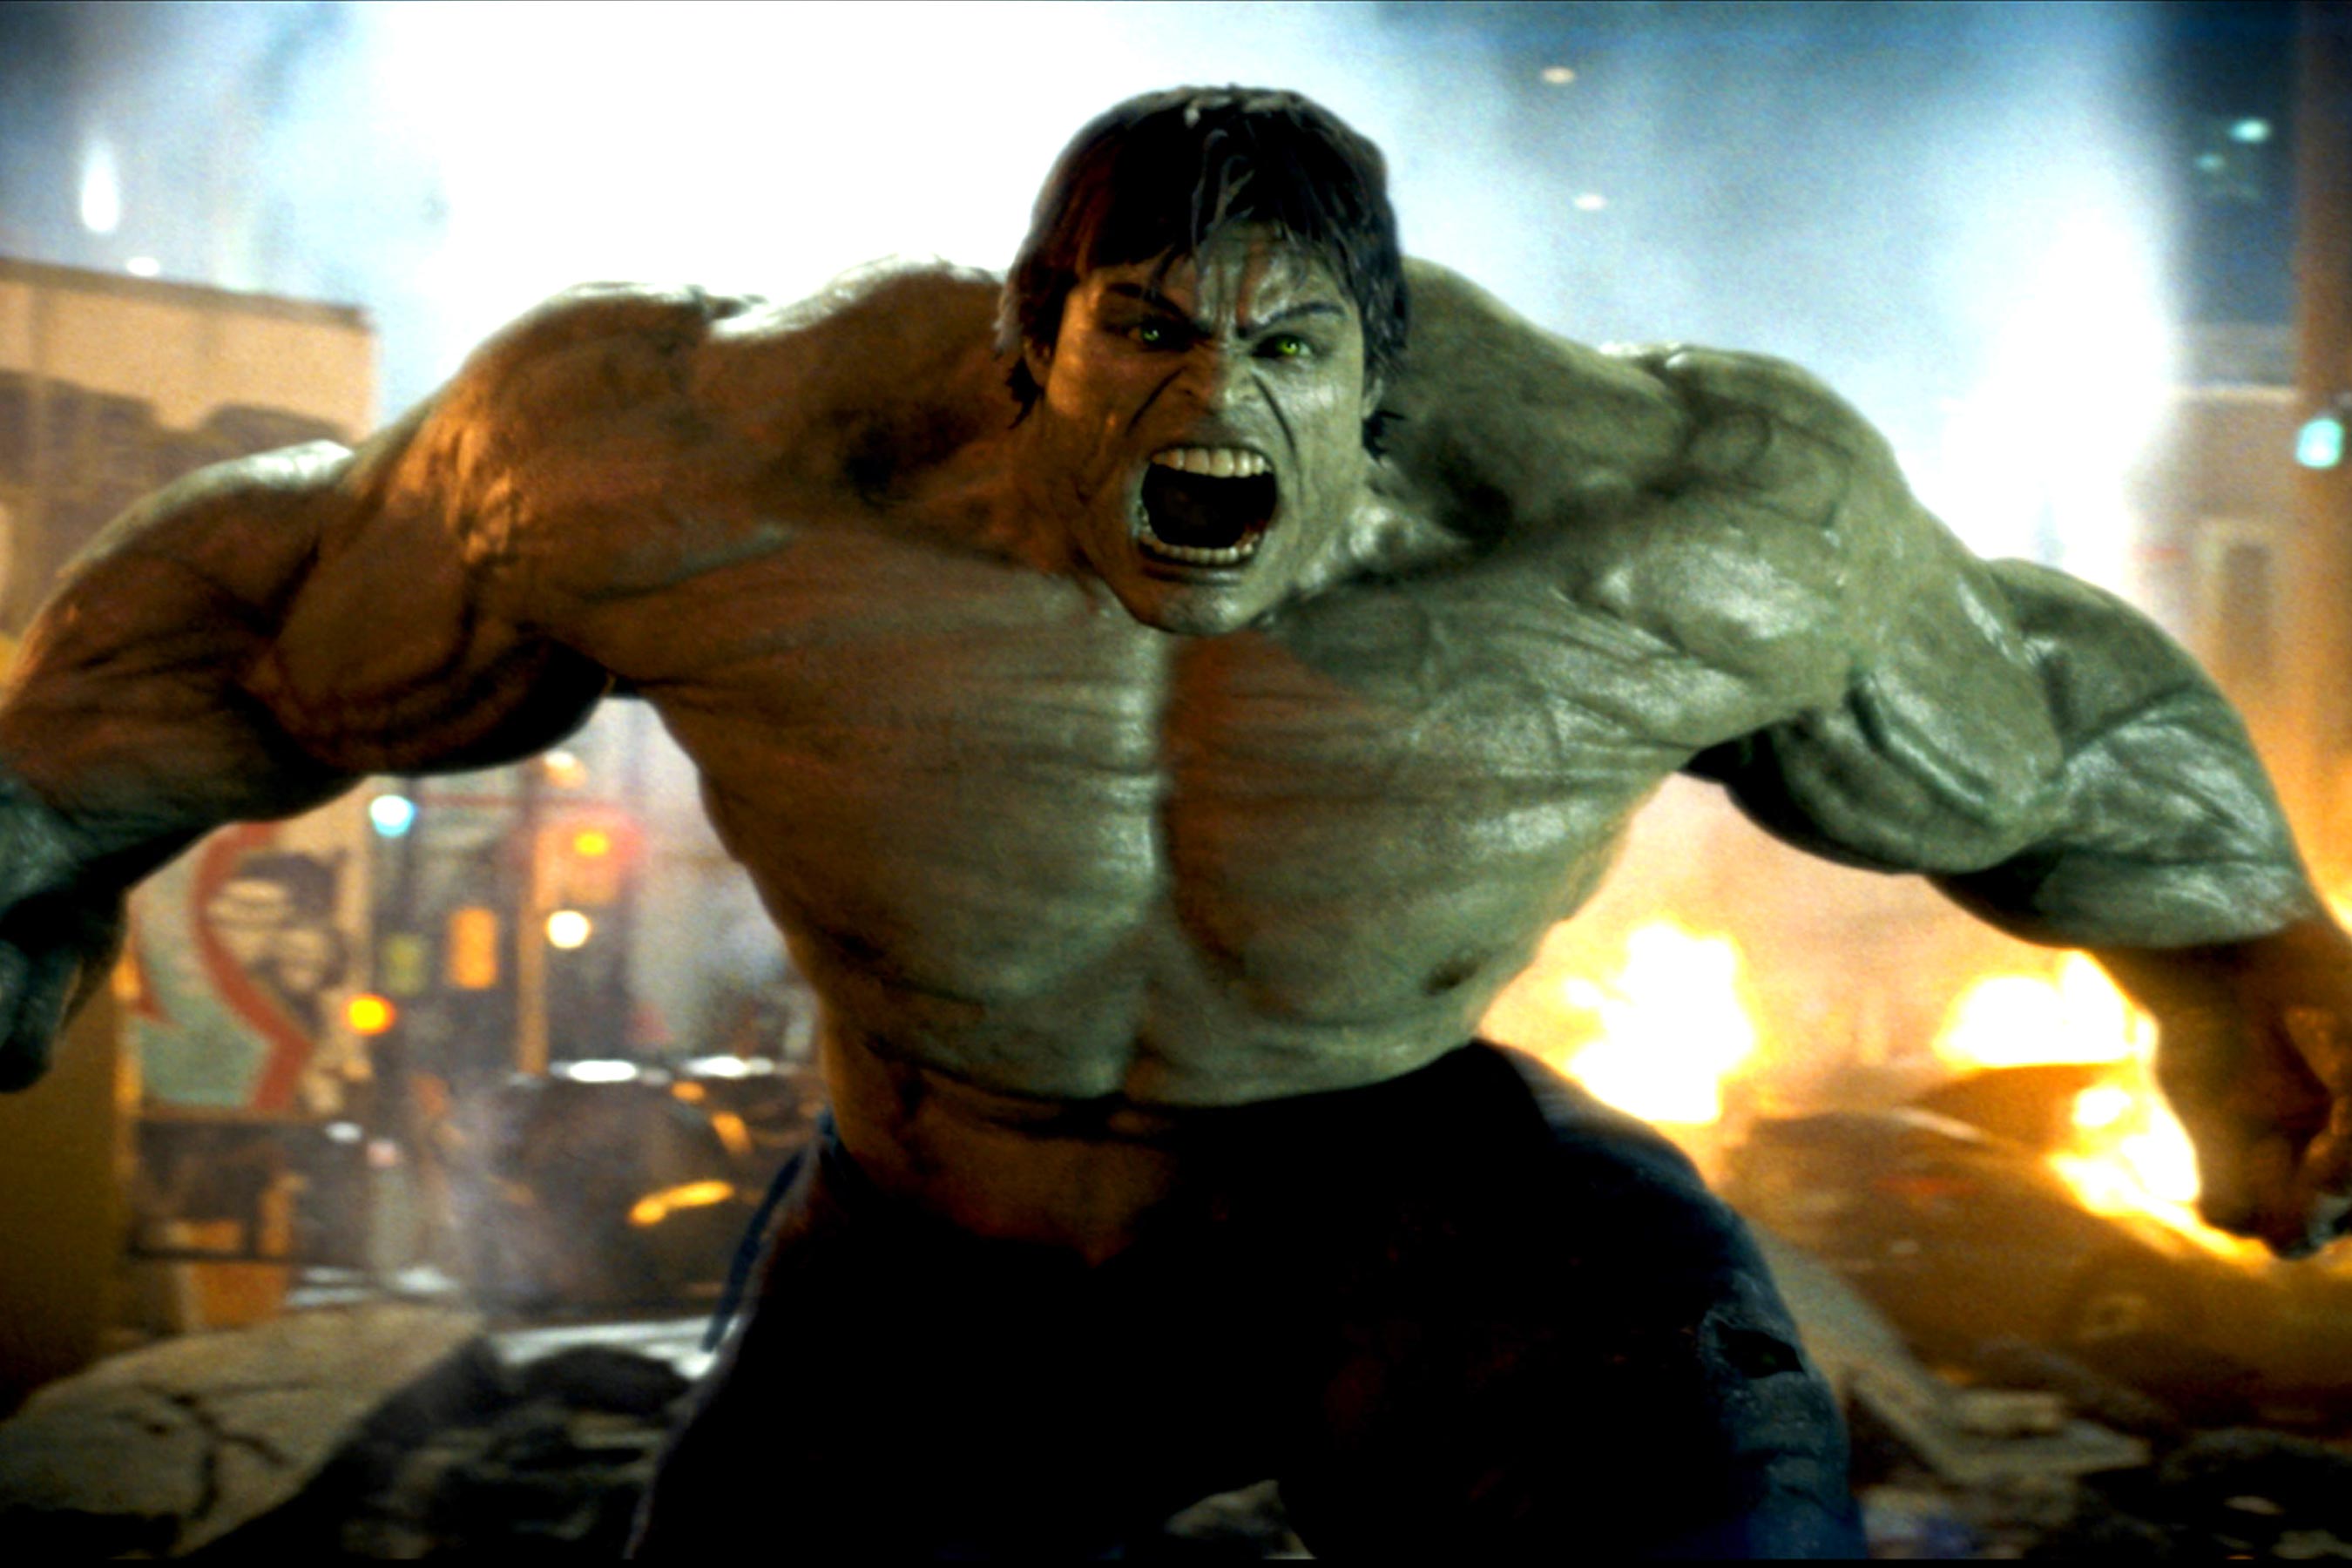 Which Avenger Are You? Super strength The Incredible Hulk (2008)